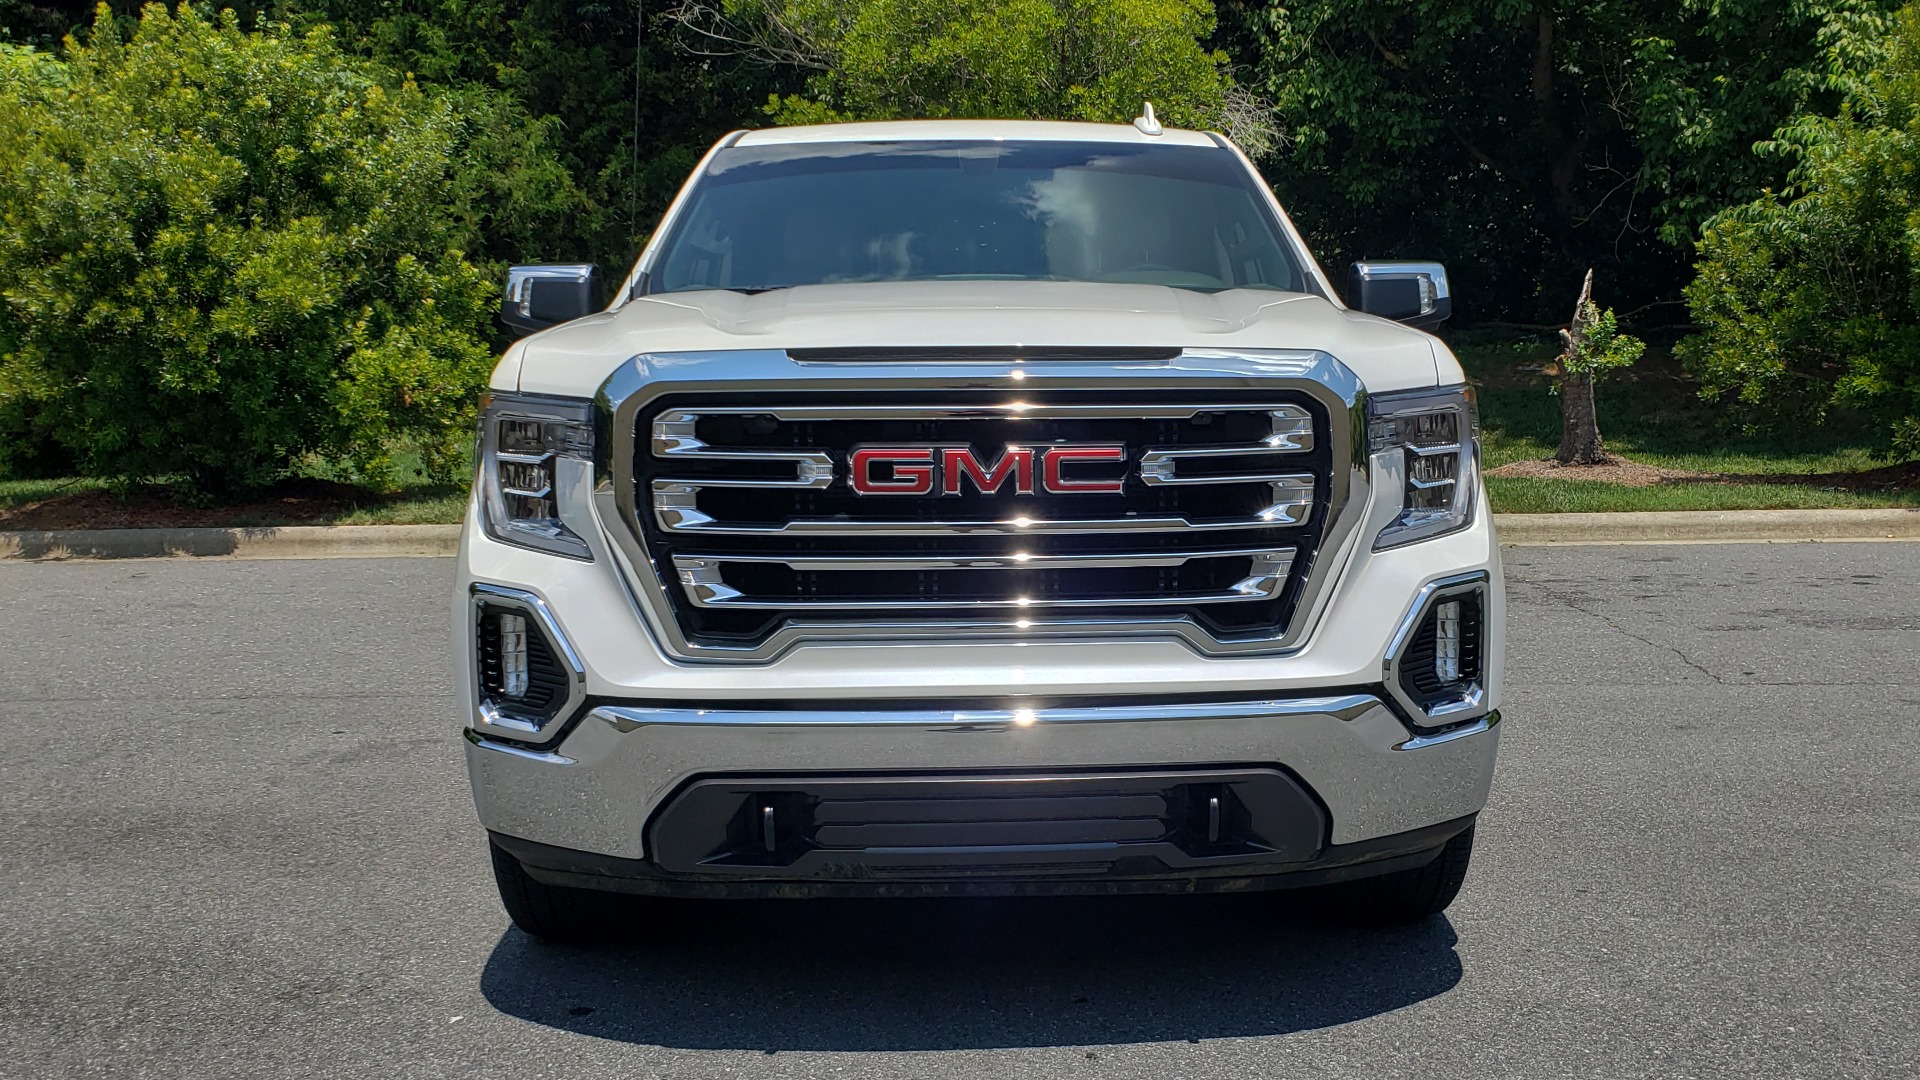 Used 2019 GMC SIERRA 1500 SLT 4WD CREWCAB / PREMIUM / 6.2L V8 / NAV / SUNROOF / VENT SEATS for sale Sold at Formula Imports in Charlotte NC 28227 24